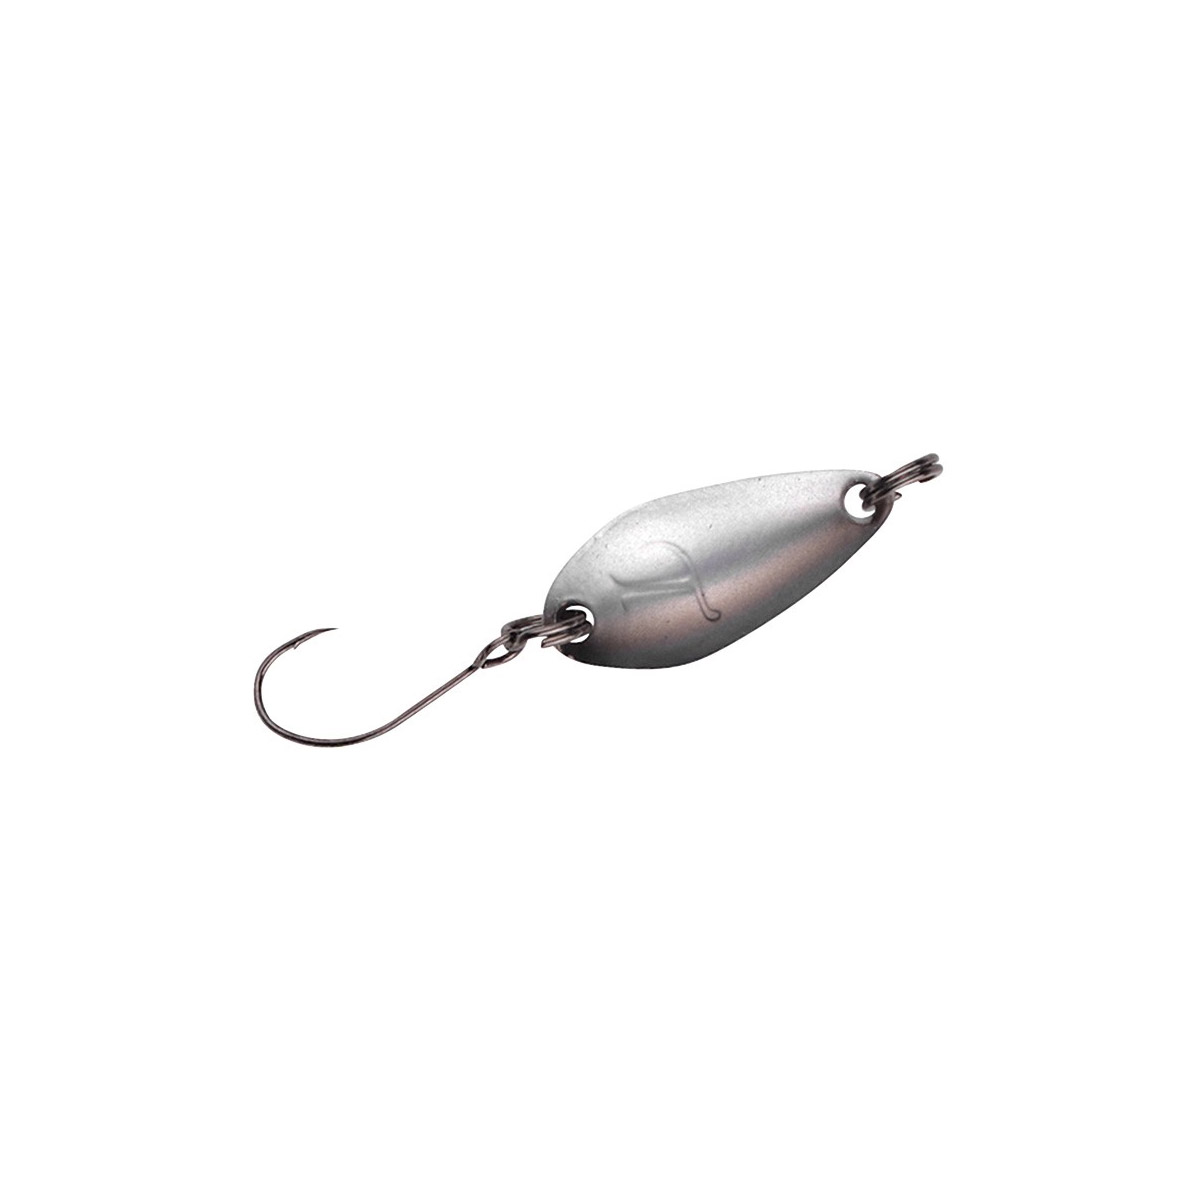 Spro Trout Master Incy Spoon 0,5 Gram -  Minnow 